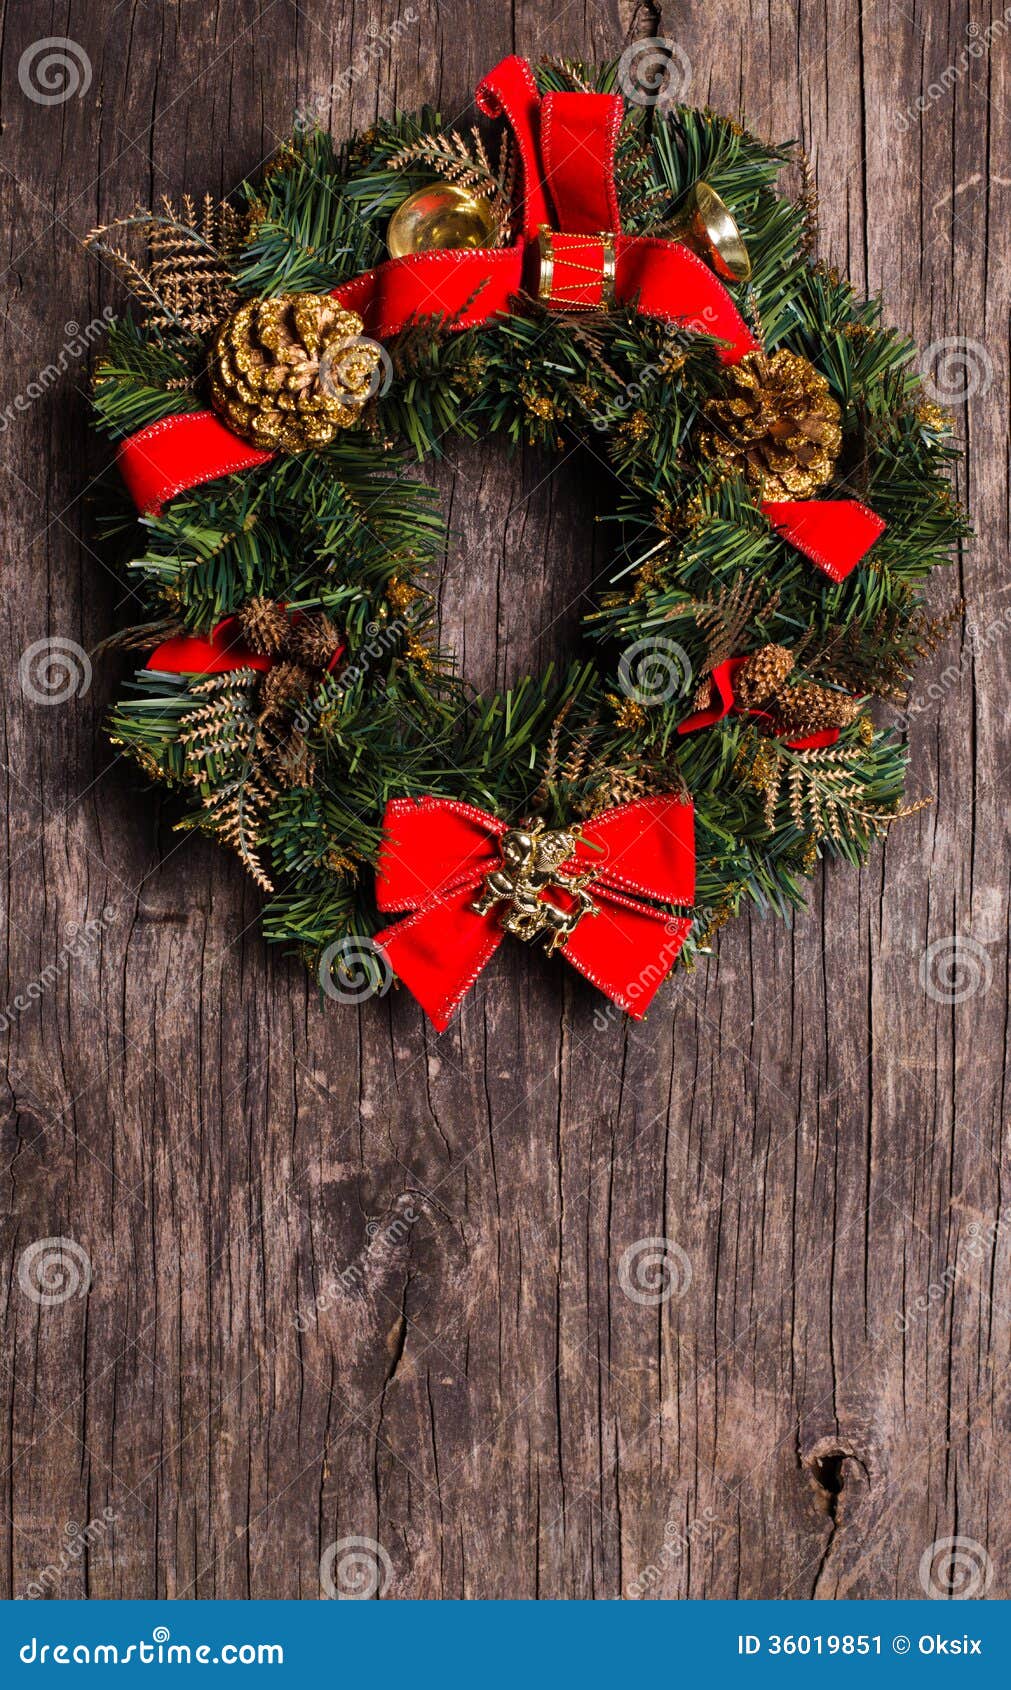 Christmas wreath stock image. Image of rough, leaves - 36019851